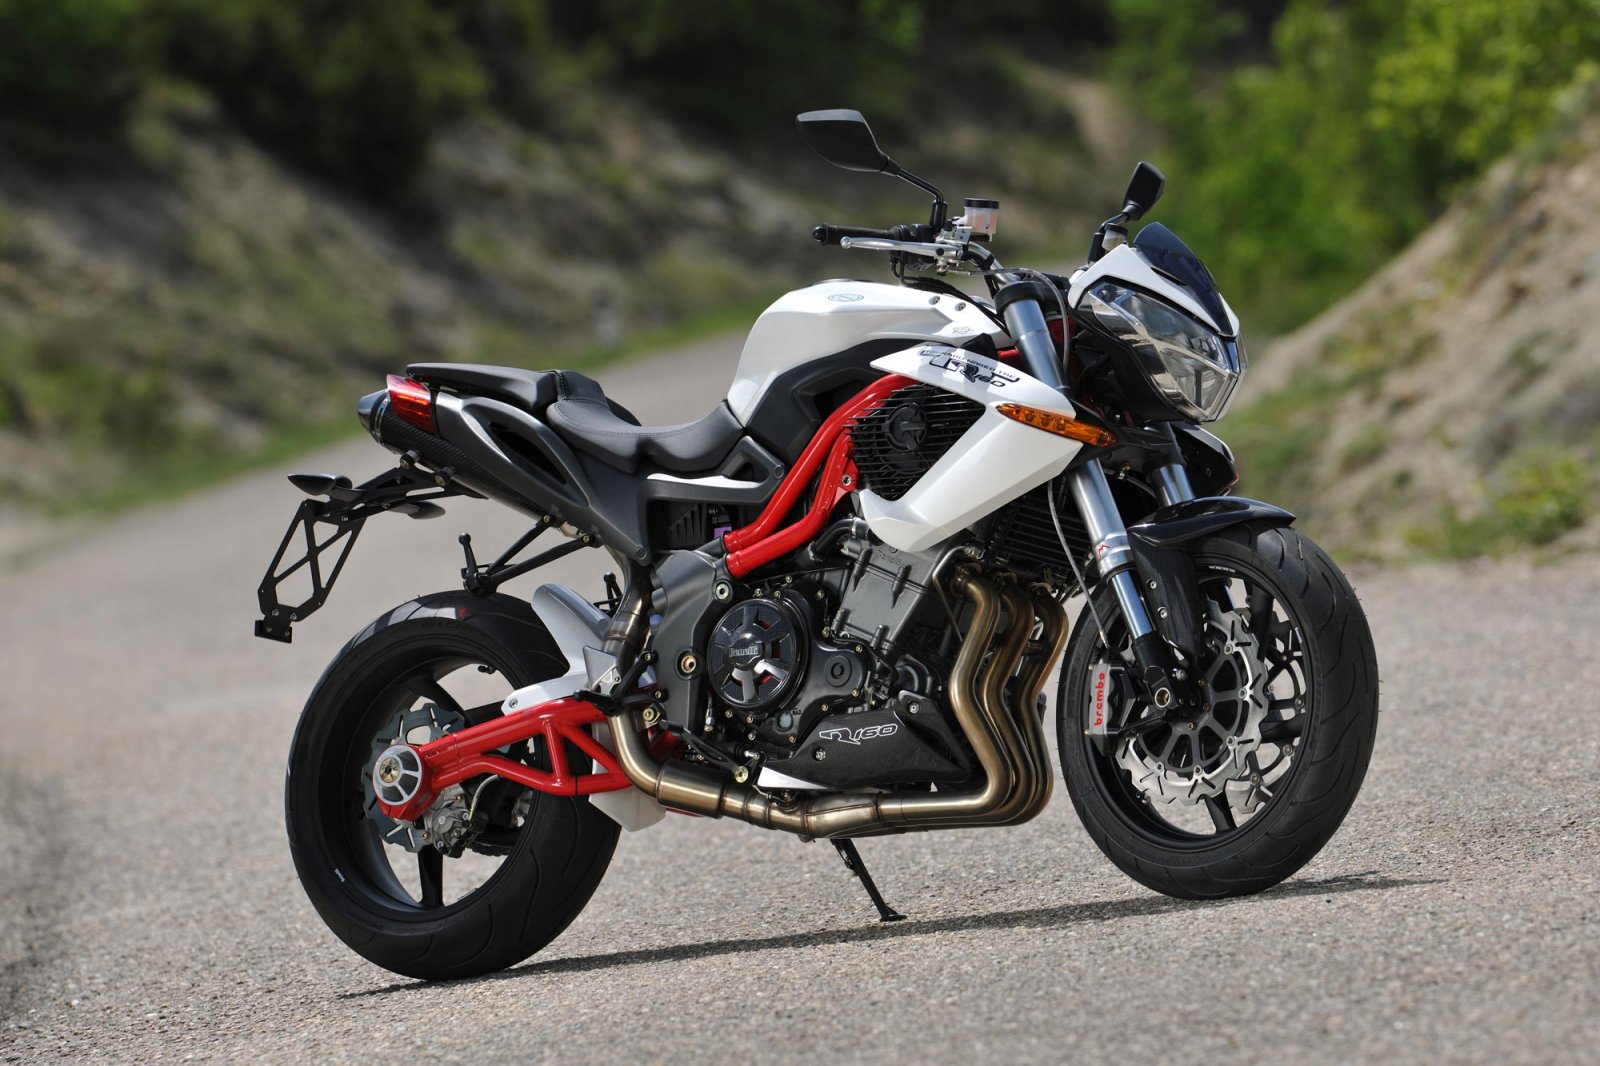 Benelli TNT 899 - Images, Photos, HD Wallpapers Free Download